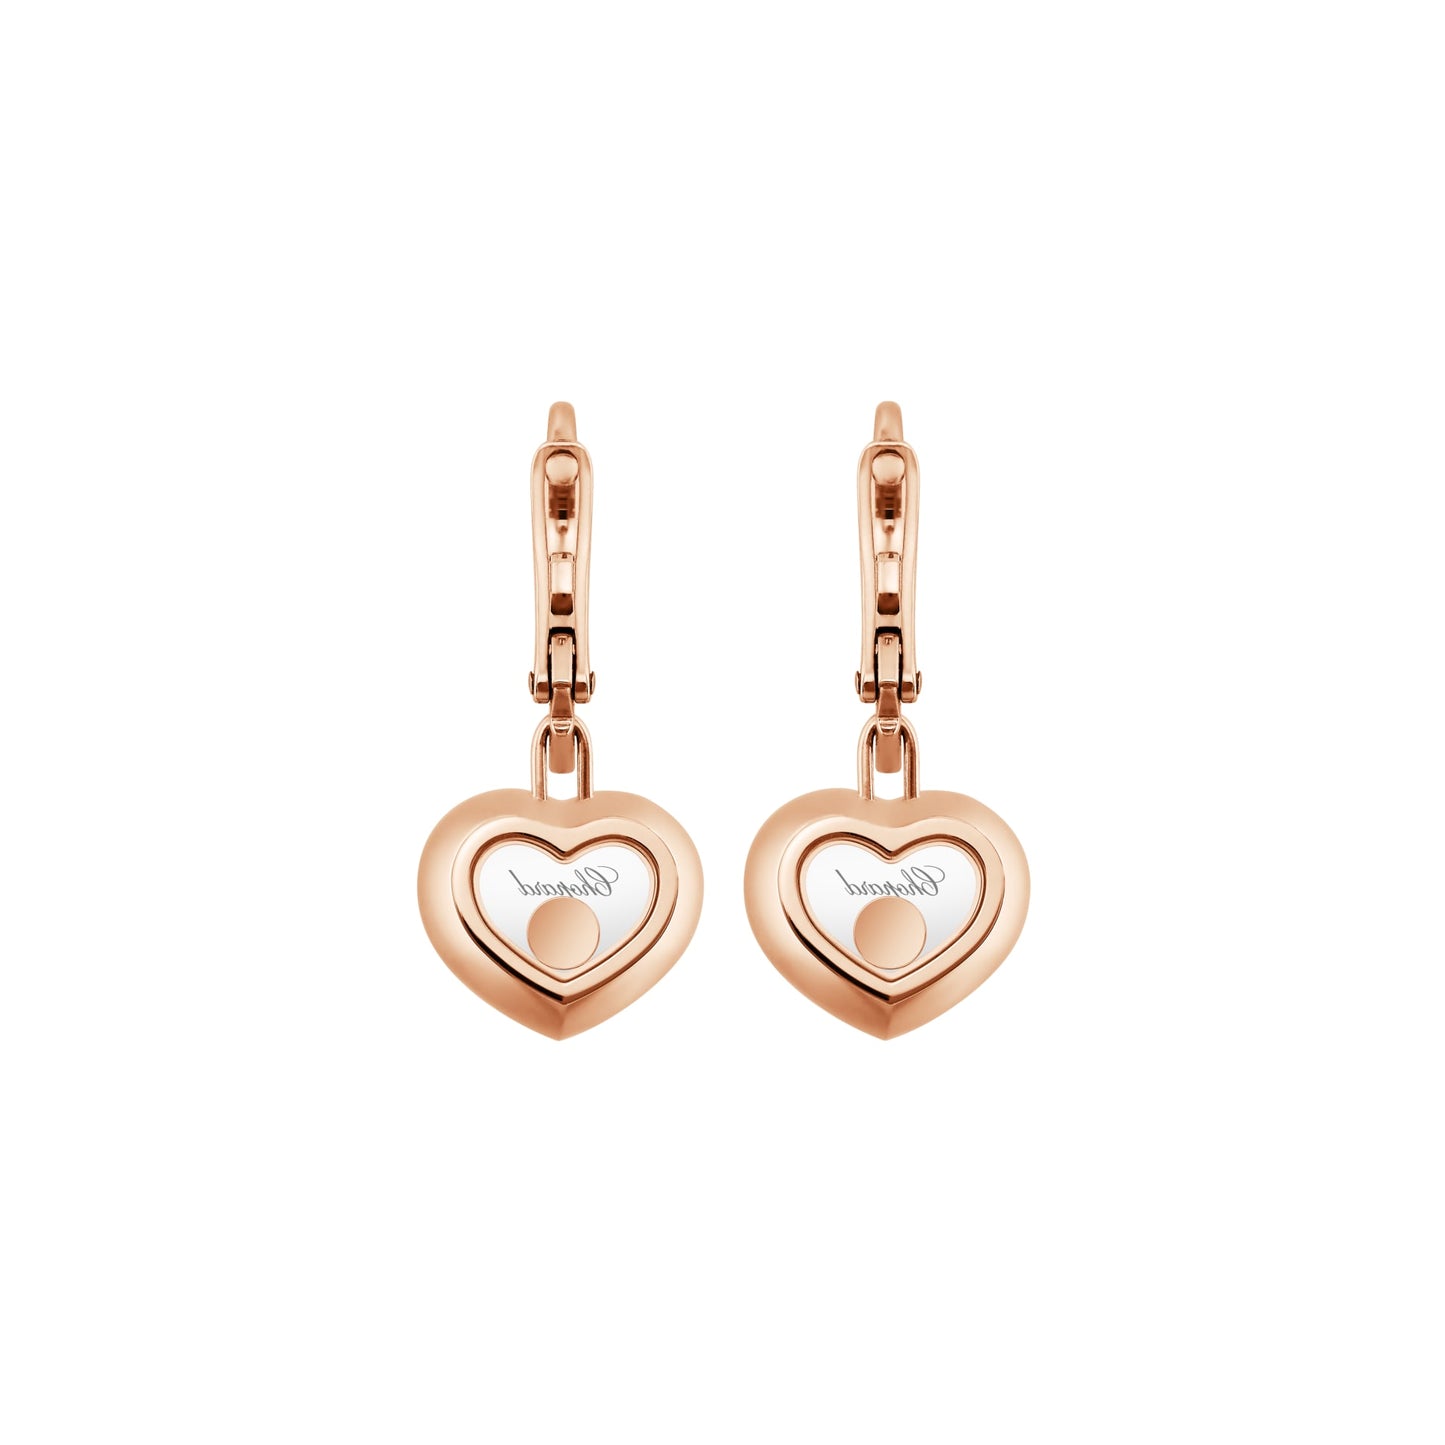 HAPPY DIAMONDS ICONS EARRINGS, ETHICAL ROSE GOLD, DIAMONDS 83A054-5301